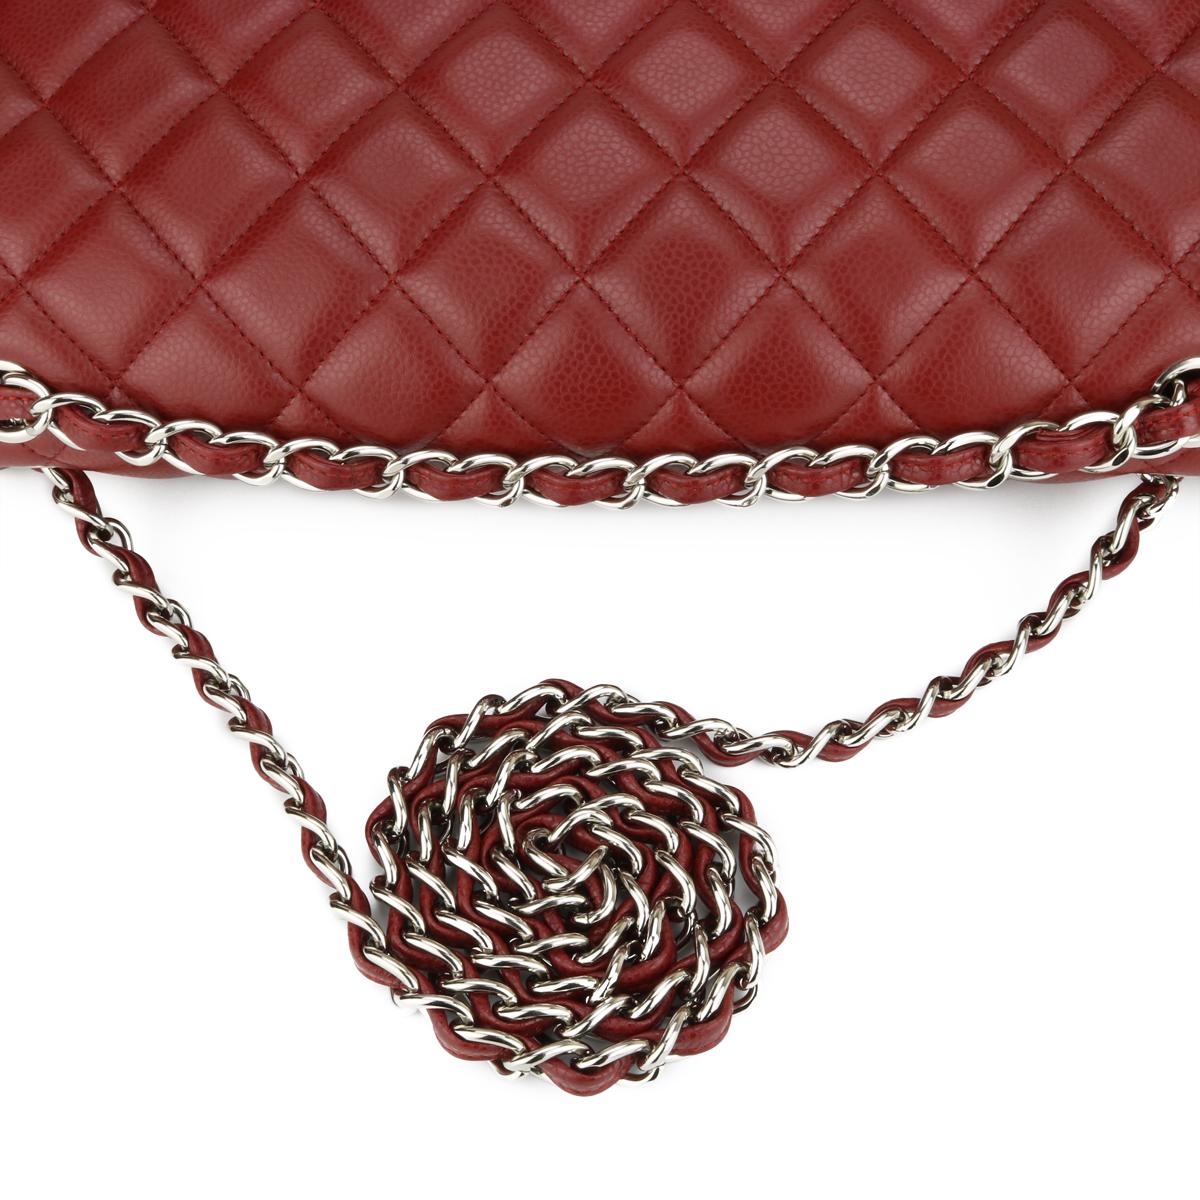 CHANEL Double Flap Maxi Bag Dark Red Burgundy Caviar with Silver Hardware 2011 4